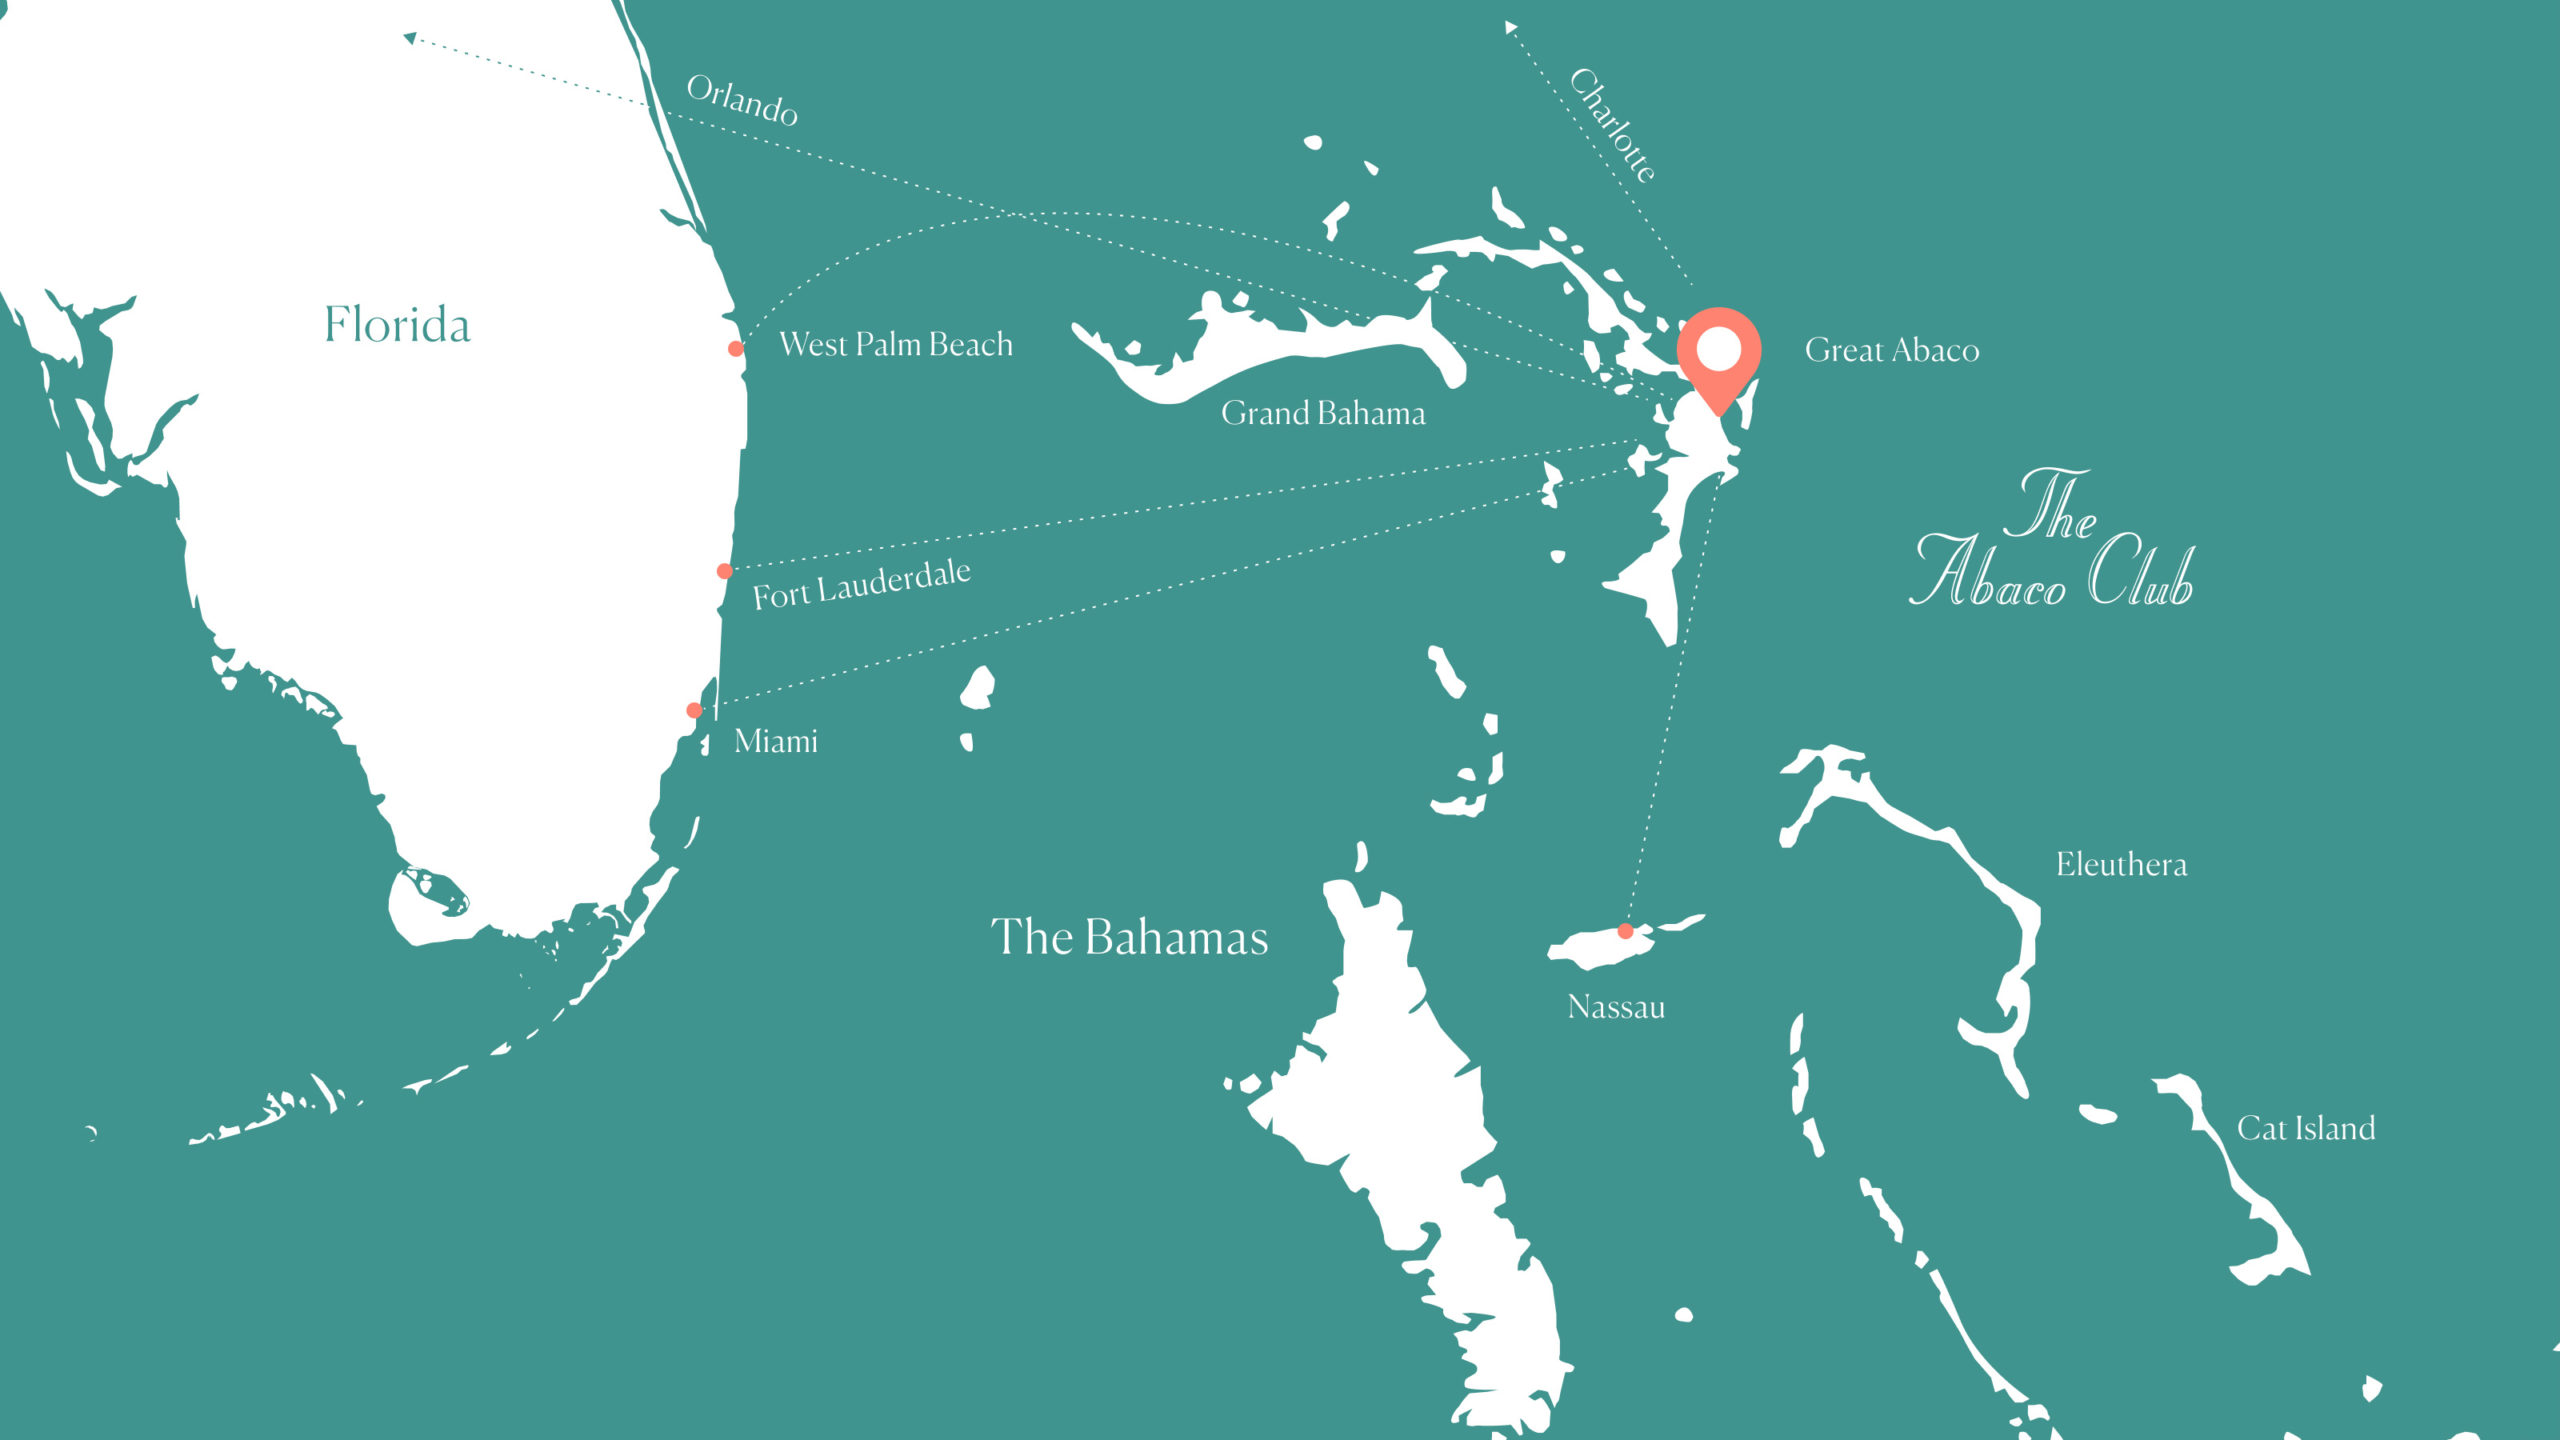 Map of The Abaco Club and flight paths